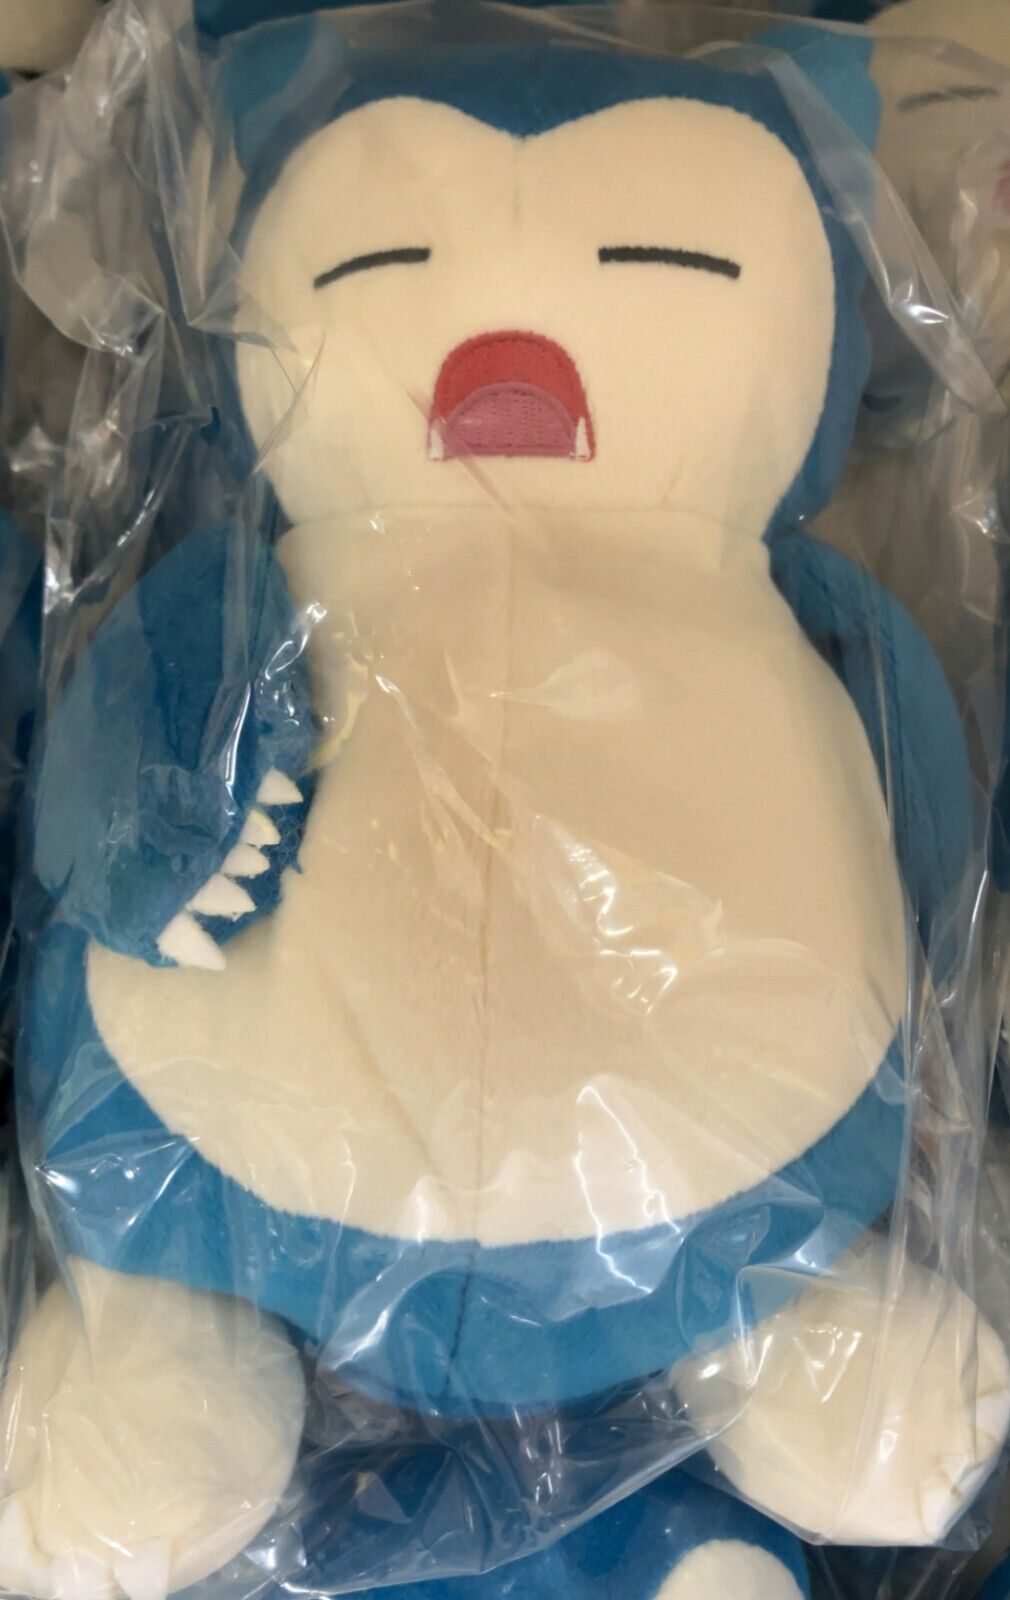 Pokemon ALL STAR COLLECTION Snorlax Stuffed toy S Size Pocket Monster Plush New